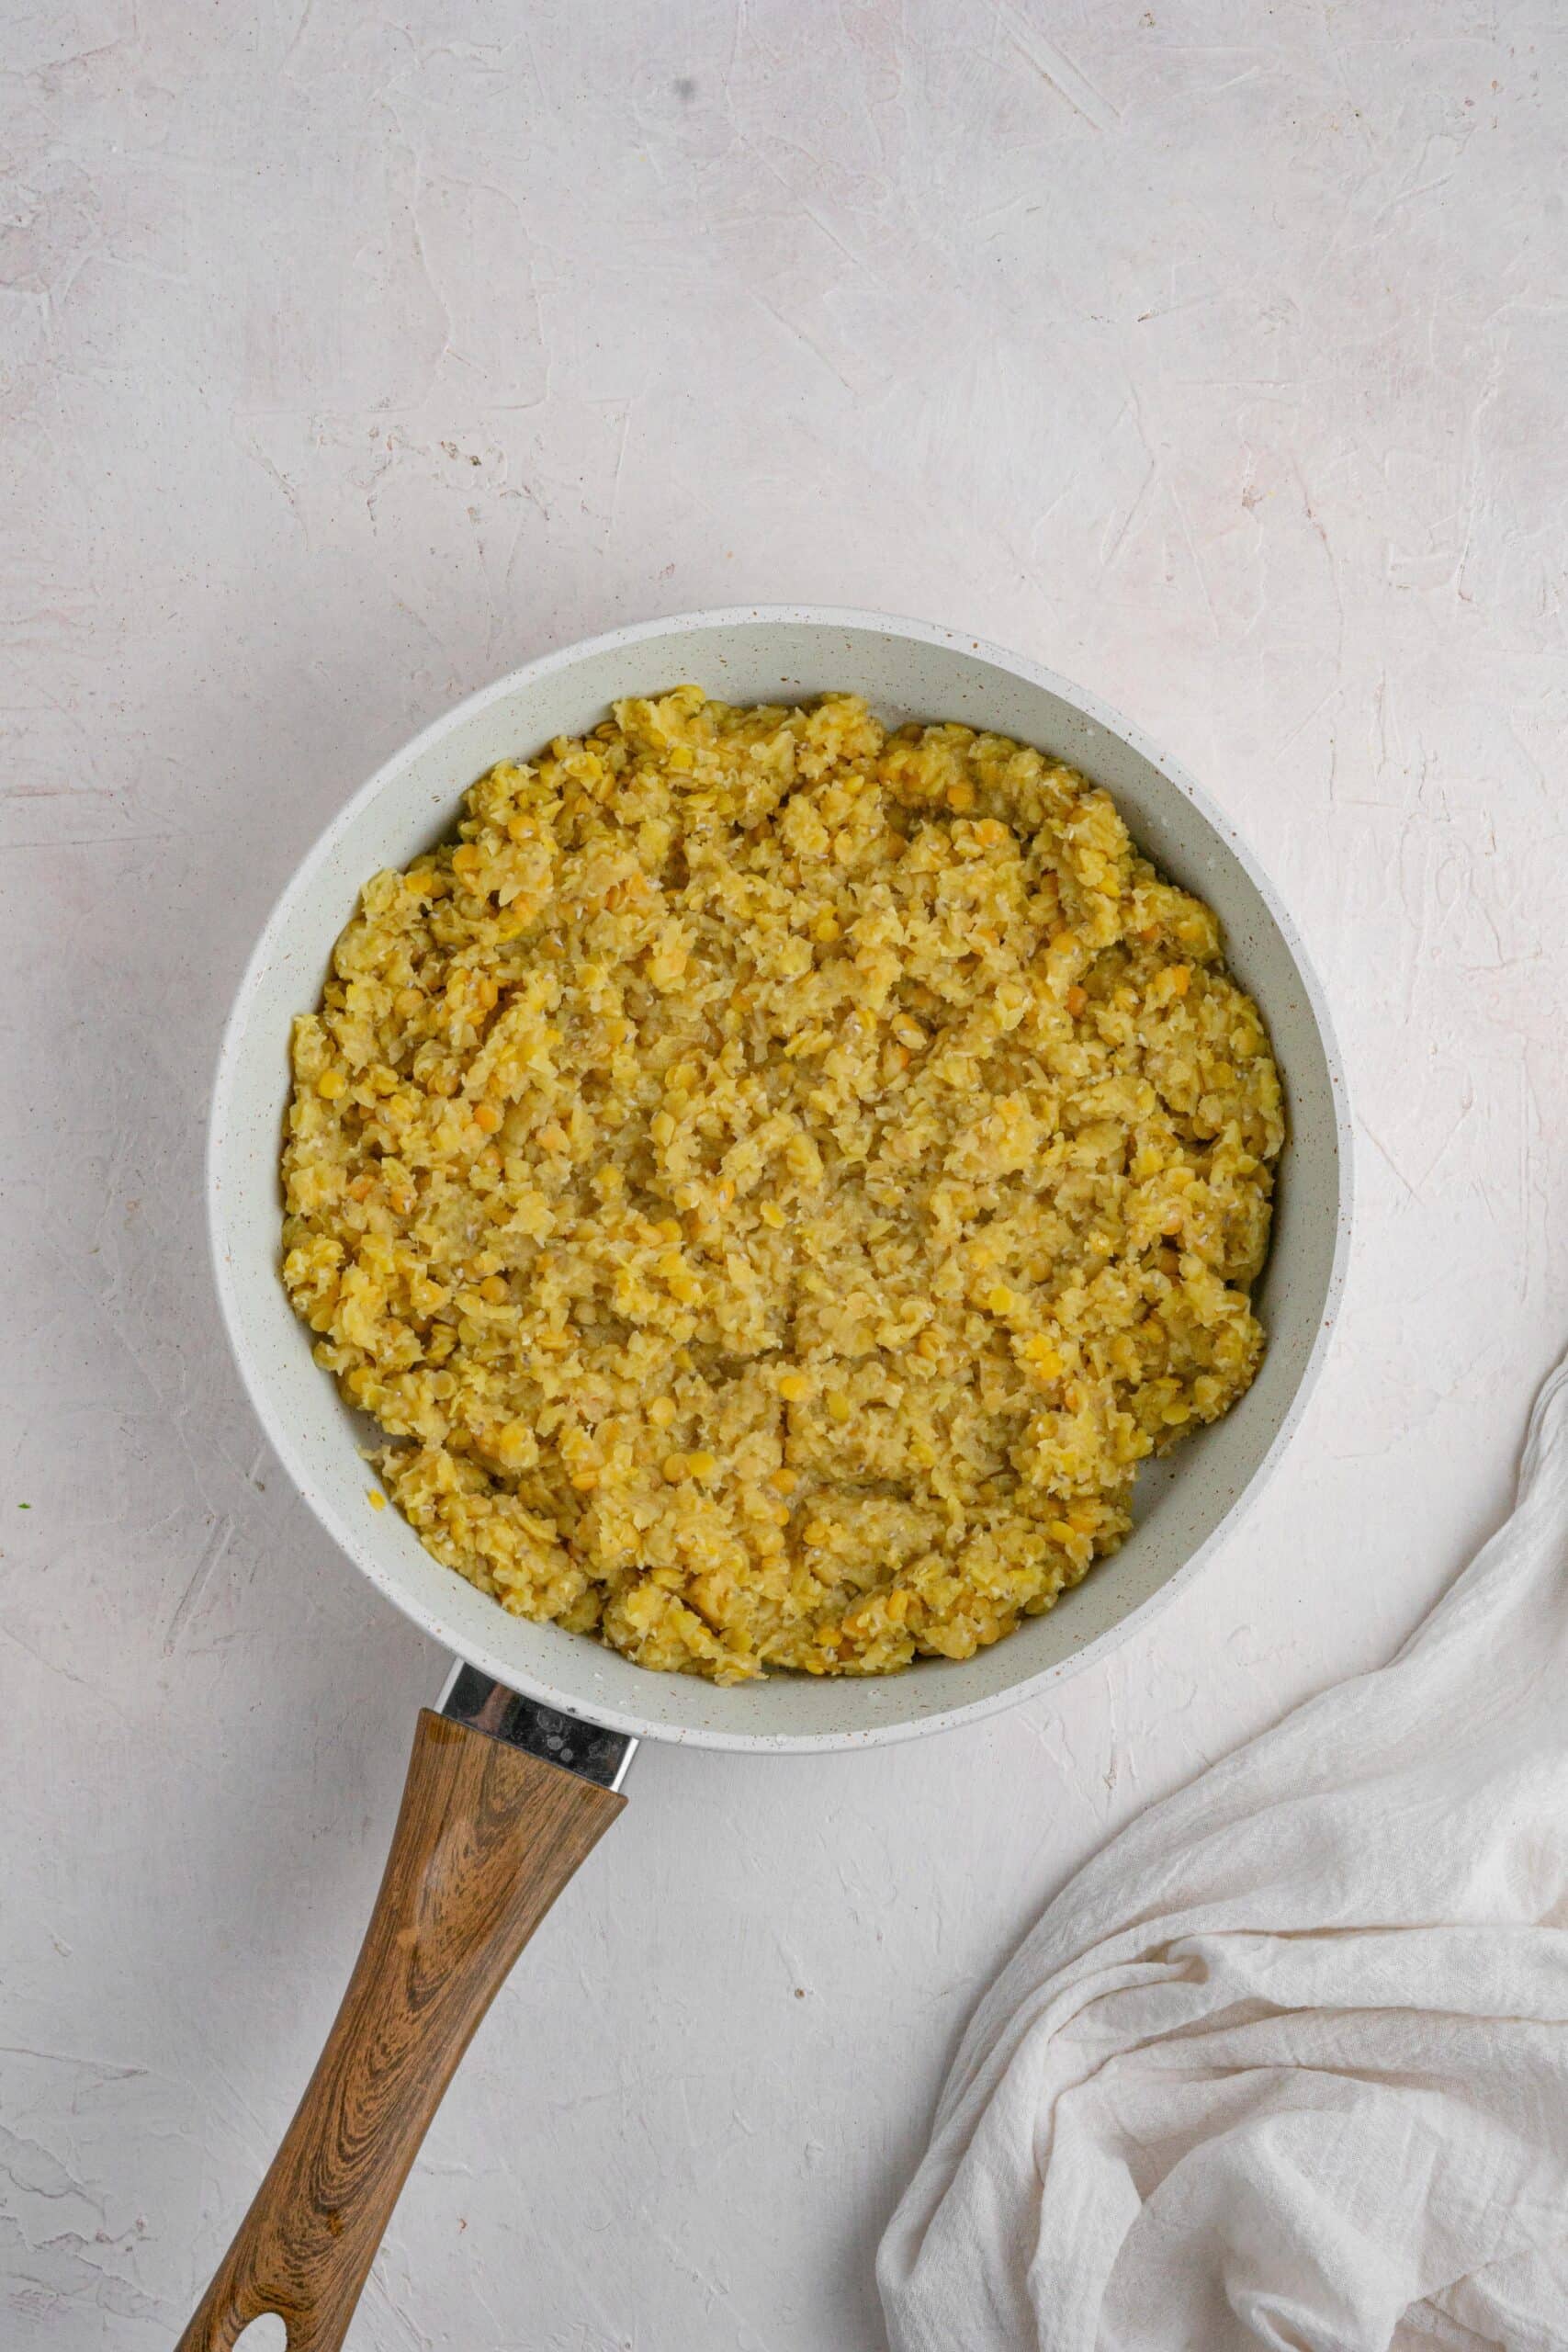 red lentils cooked in a pan